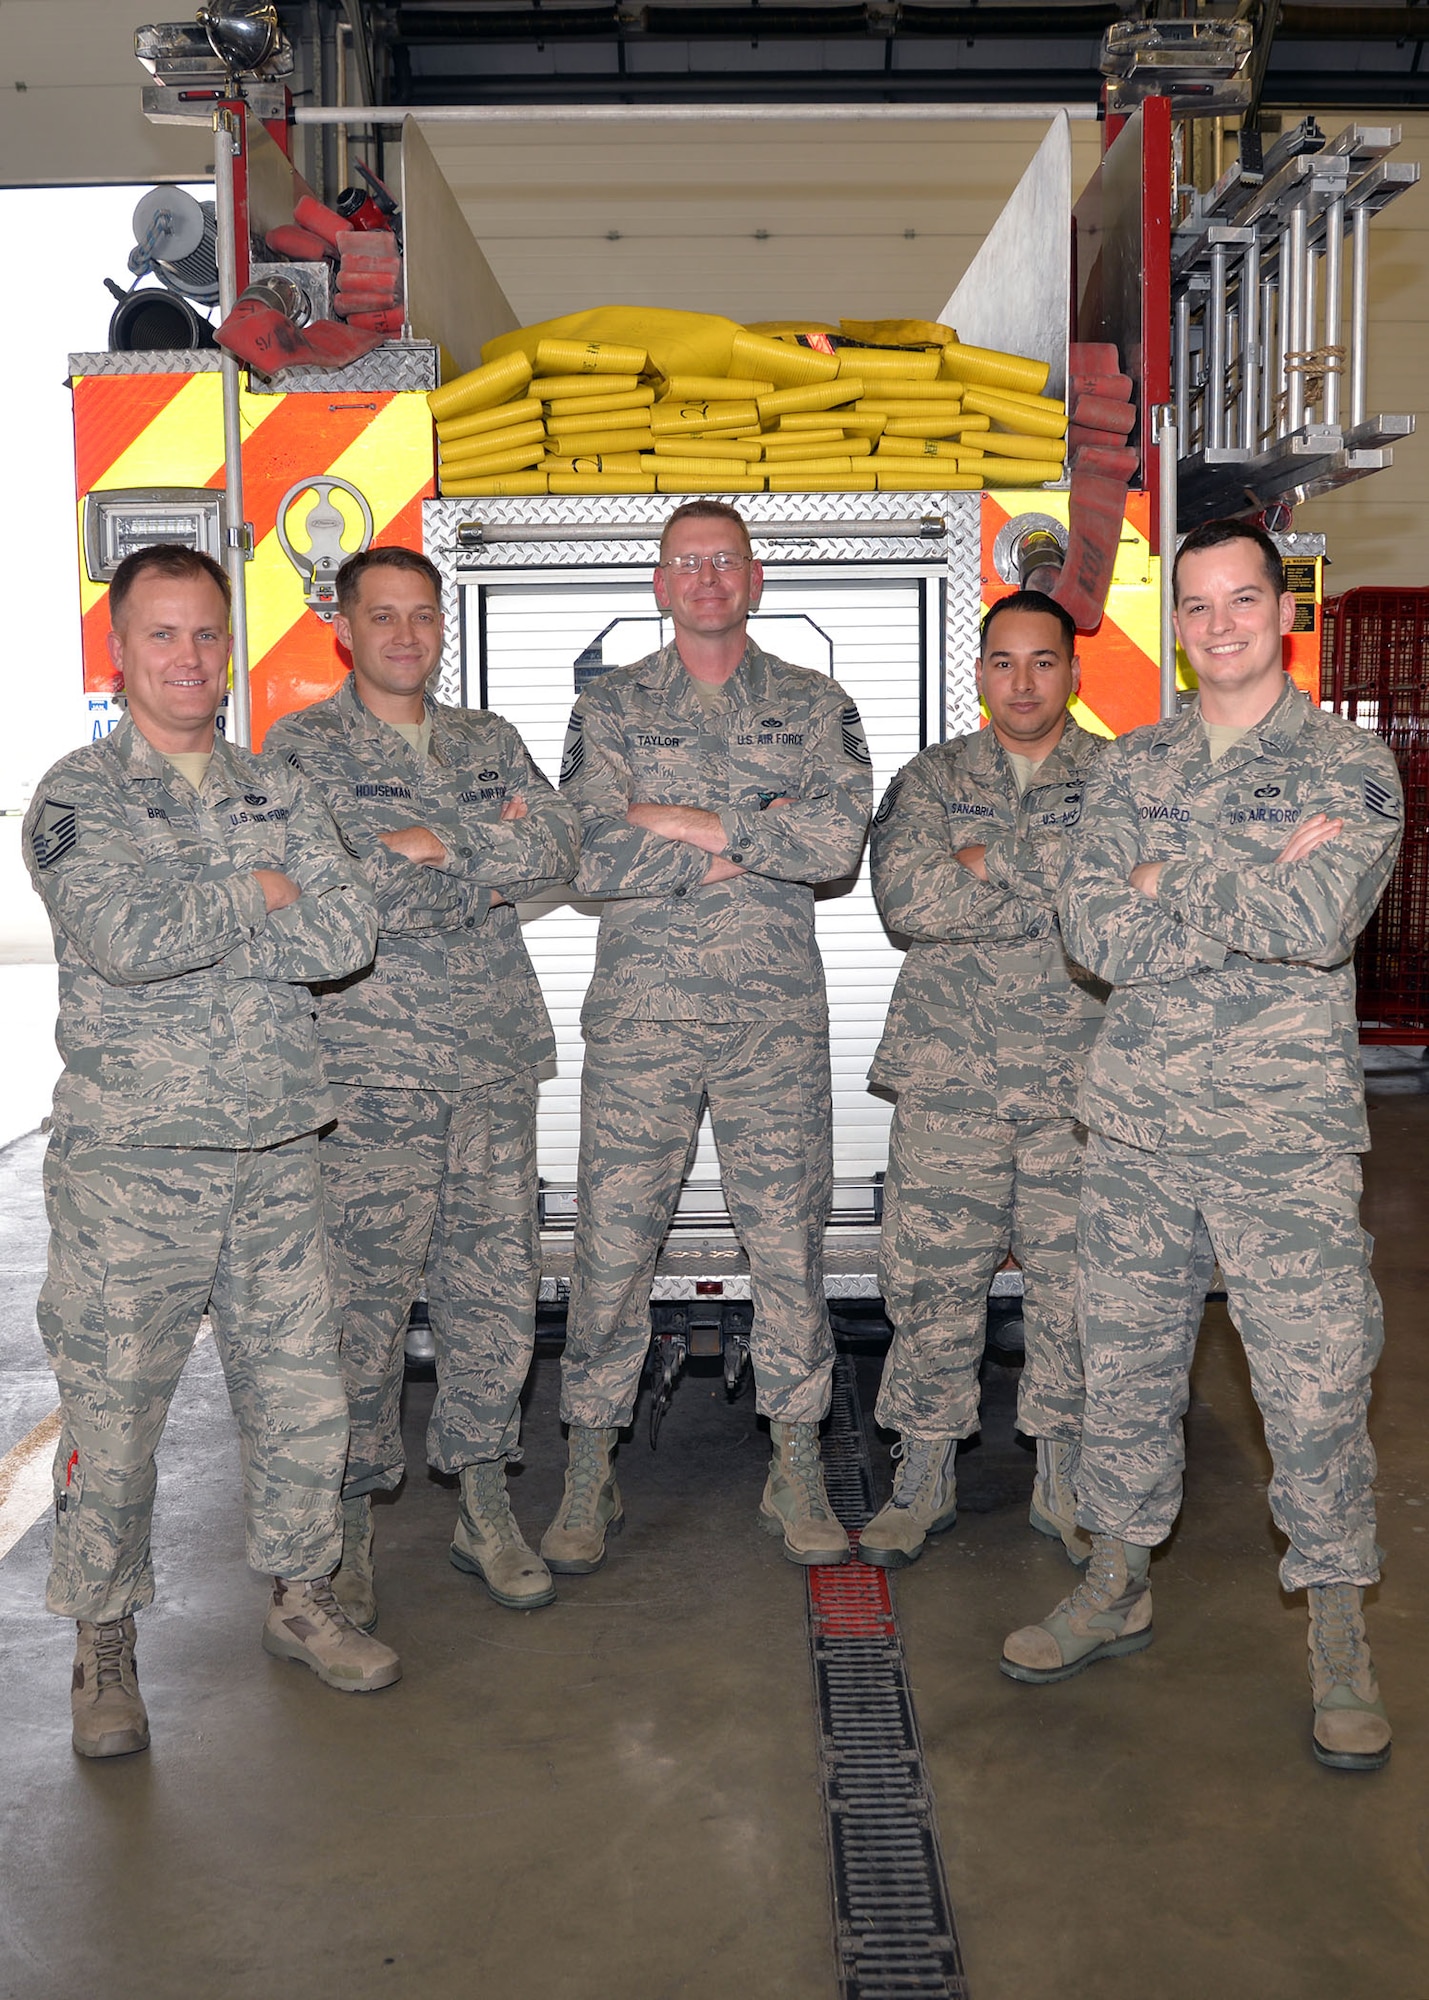 U.S. Air Force Chief Master Sgt. William Taylor, center, 100th Civil Engineer Squadron Fire Department installation fire chief, poses for a photo with some of his firefighter family Sept. 26, 2017, on RAF Mildenhall, England. Taylor was trapped, alone and almost lost his life in a fire during a training session when he was a new Airman in July 1997, aged just 20. Afterwards, he vowed to become a fire chief and that safety, training and family oriented culture would be his main focal points to ensure his team’s success. (U.S. Air Force photo by Karen Abeyasekere)